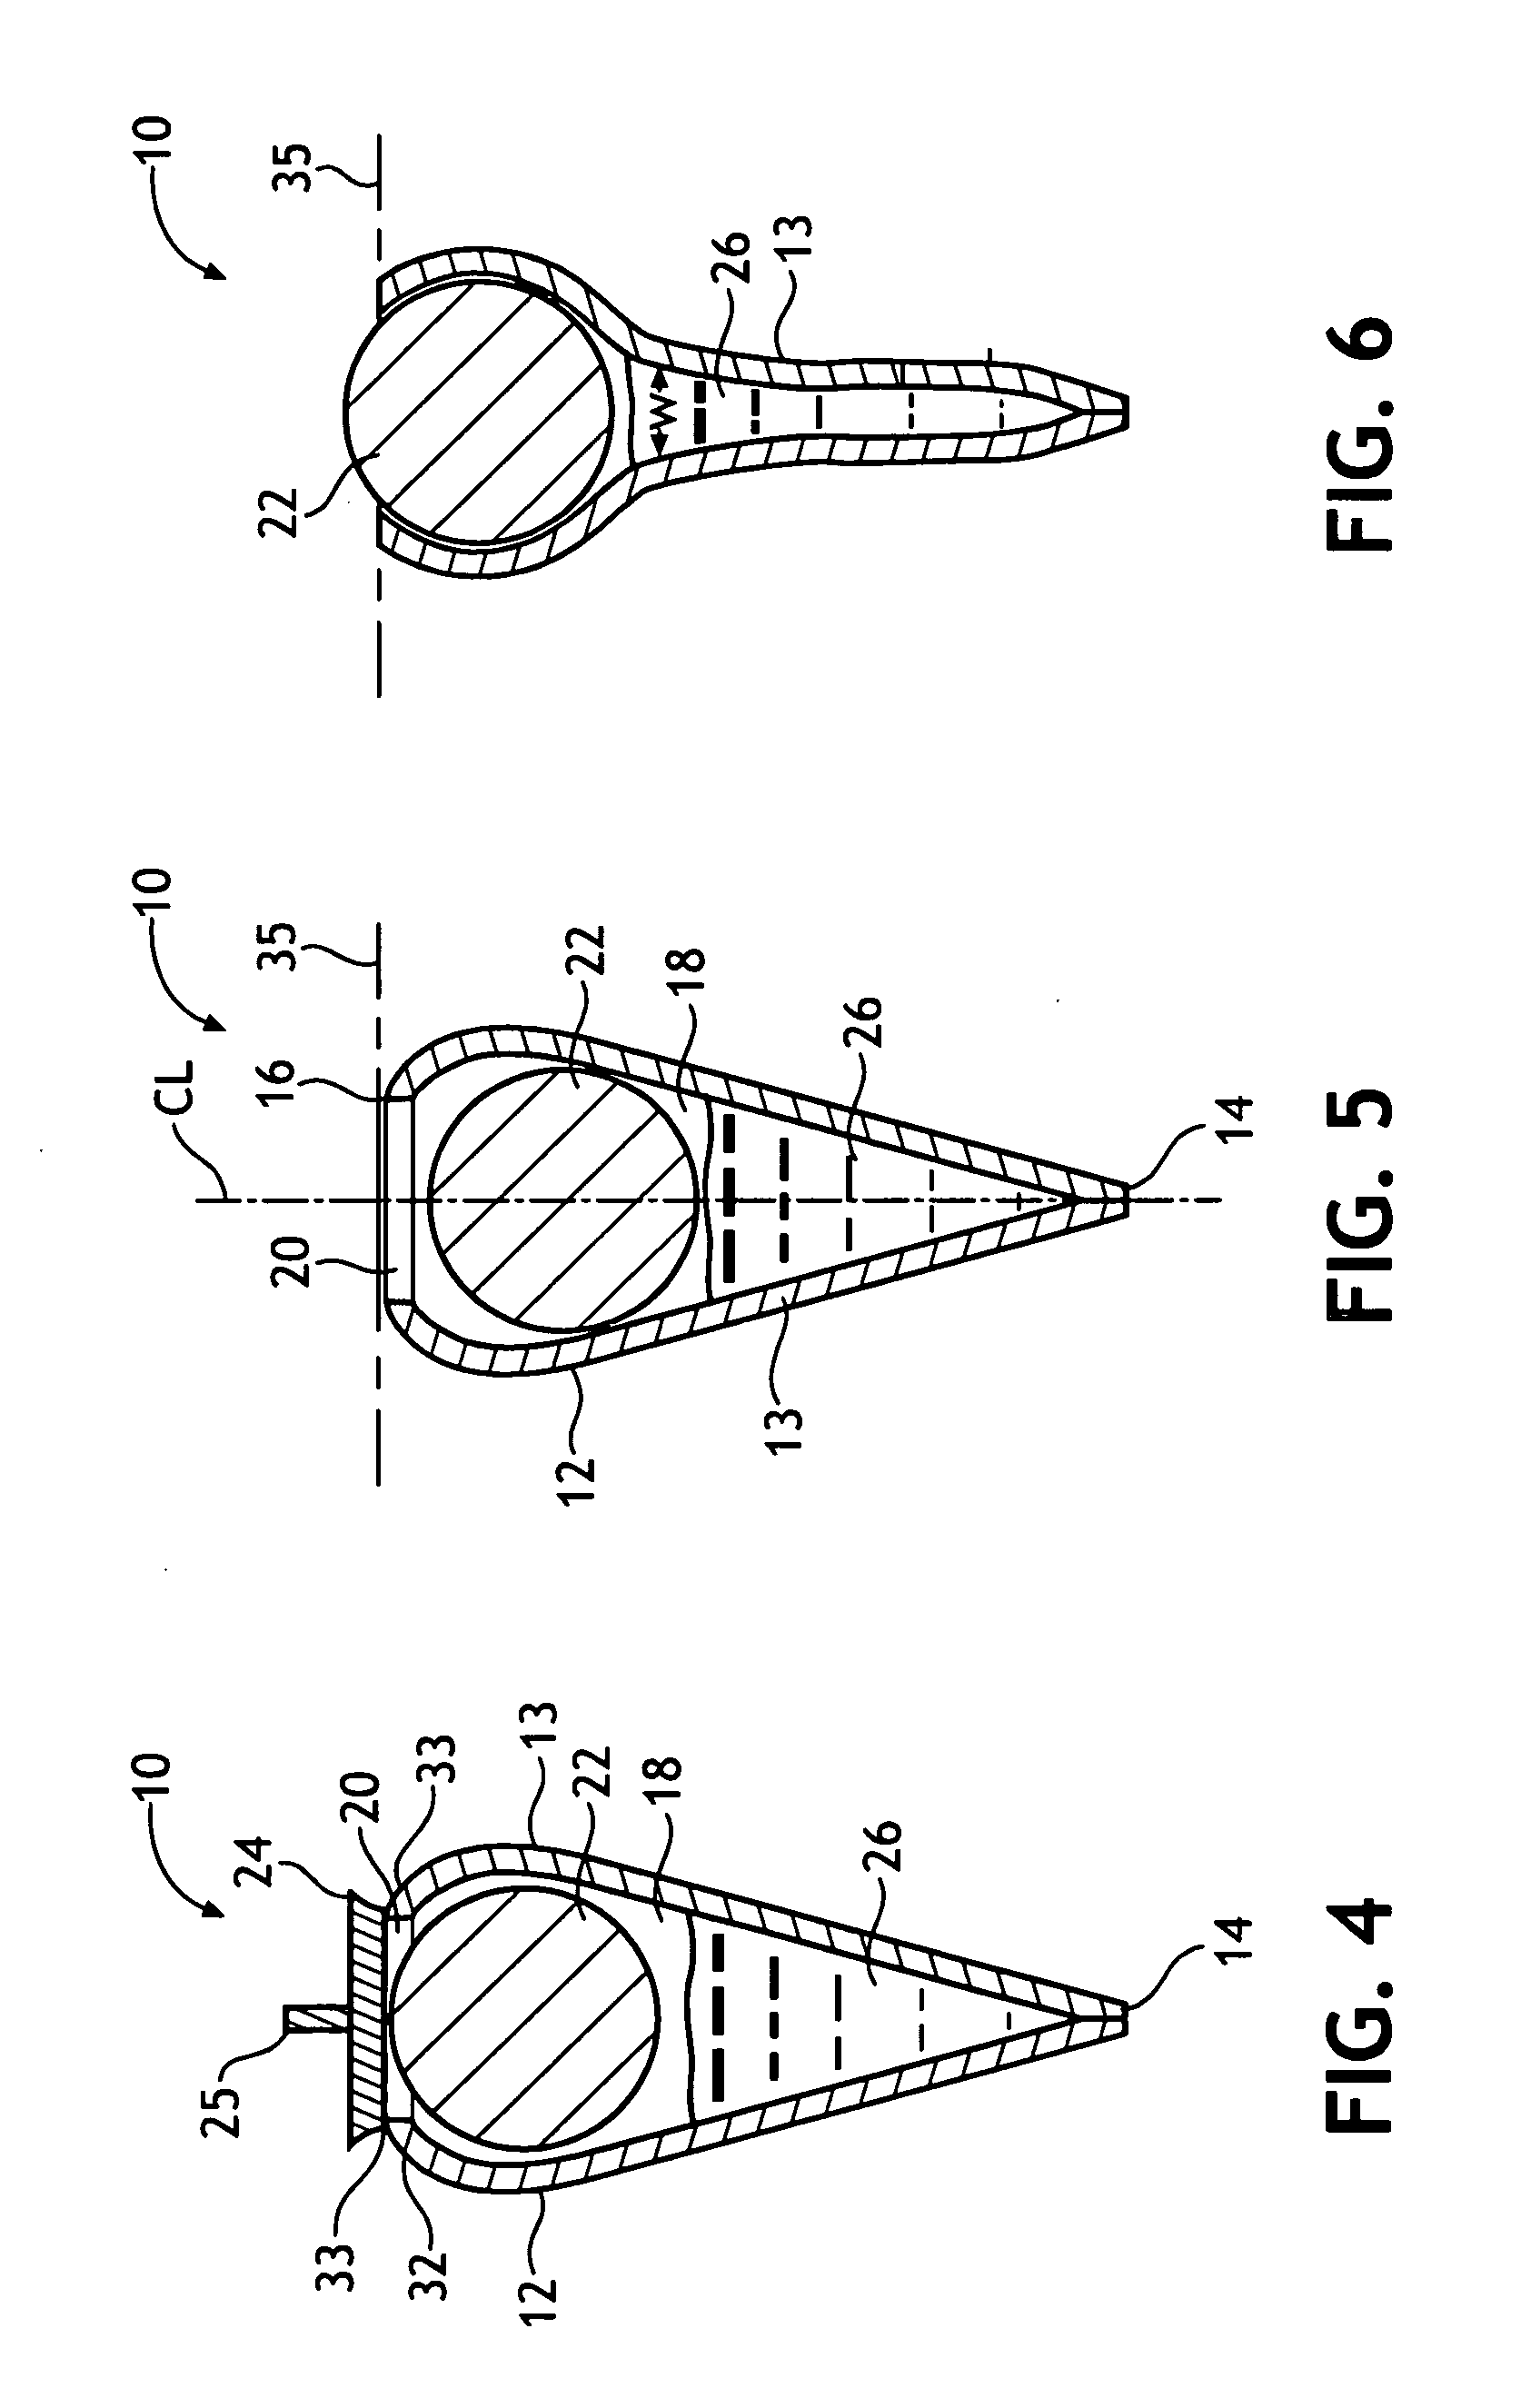 Delivery device for liquid or semi-solid materials